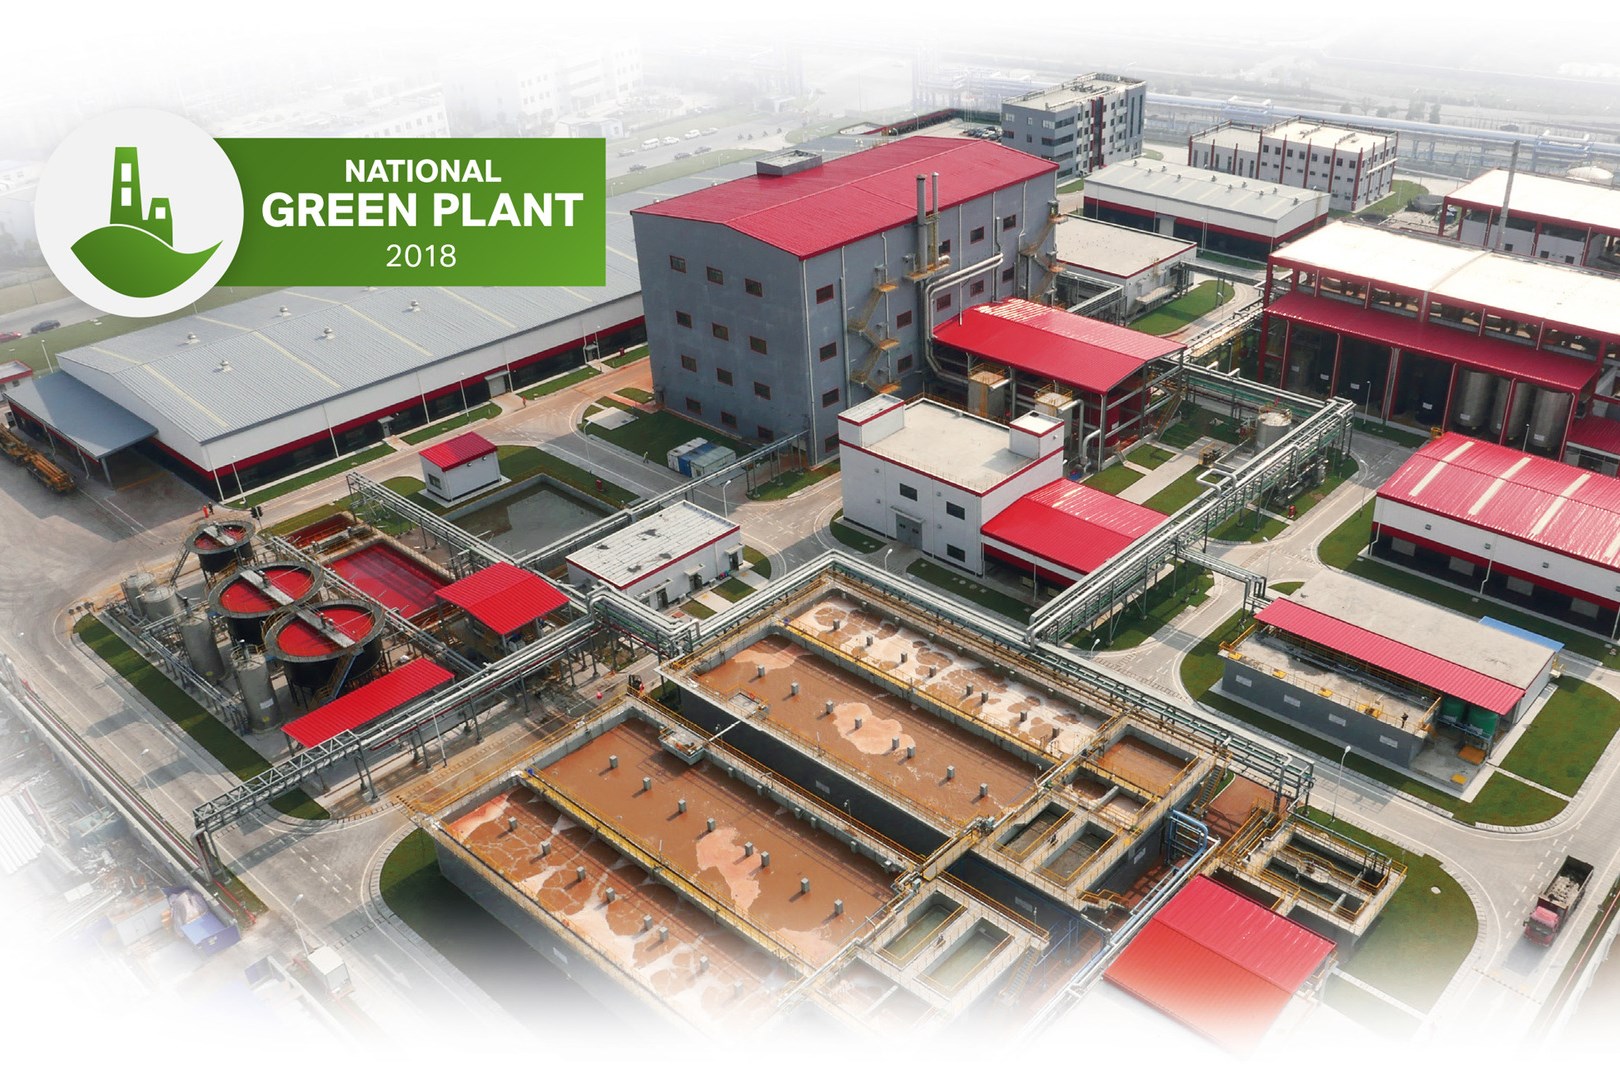 IPG  pigment production site in Ningbo, China, with 